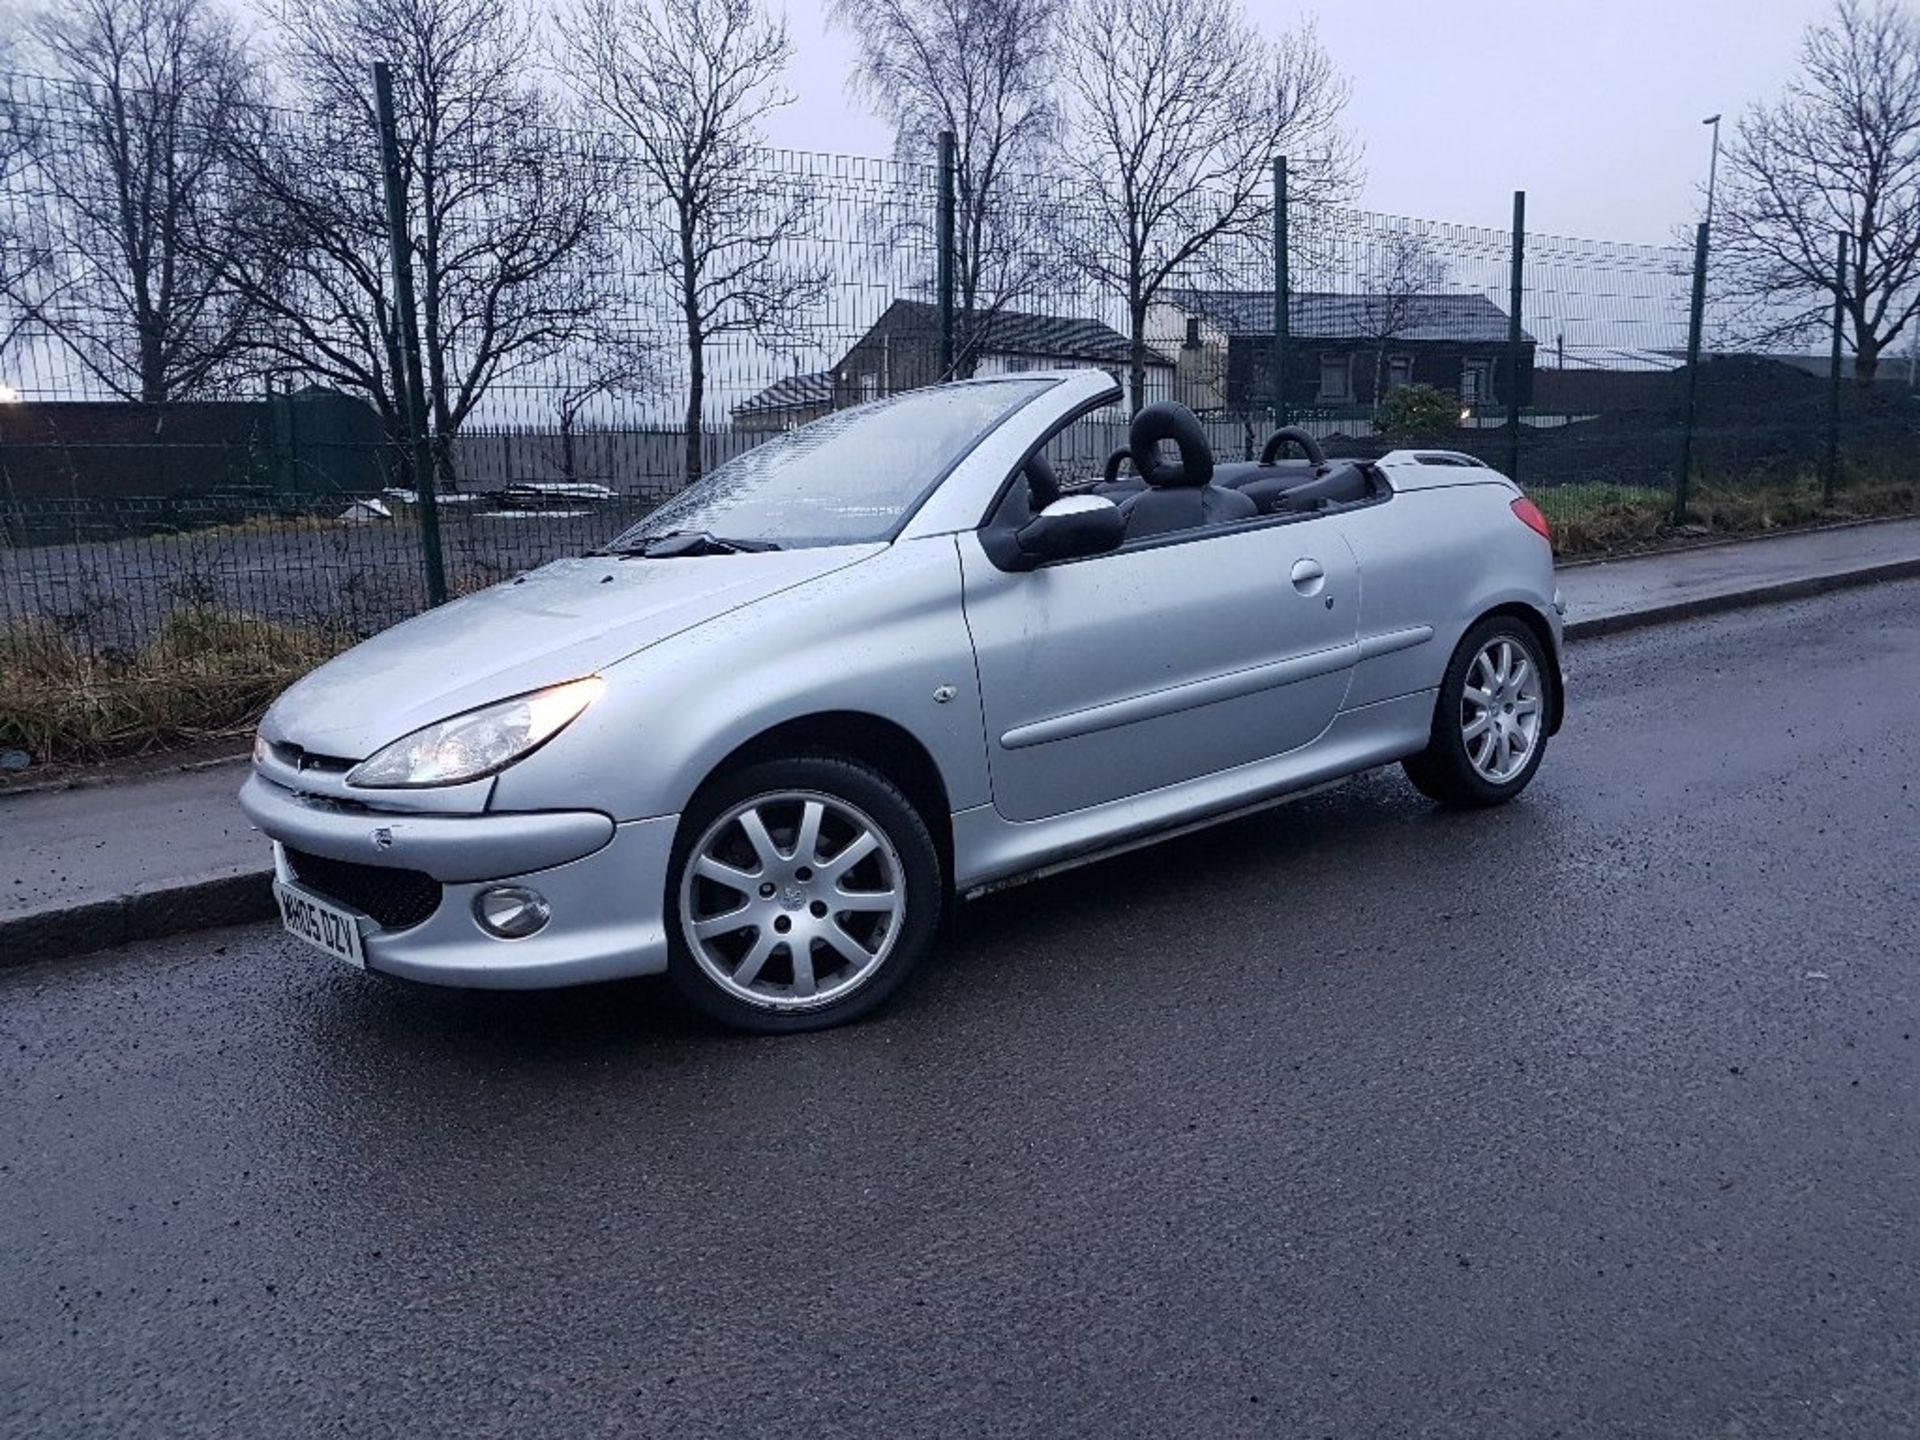 PEUGEOT, 206CC ALLURE HDI, MH05 DZV, FIRST DATE OF REGISTRATION 15/08/2005, 1.6 LITRE, DIESEL, - Image 13 of 14